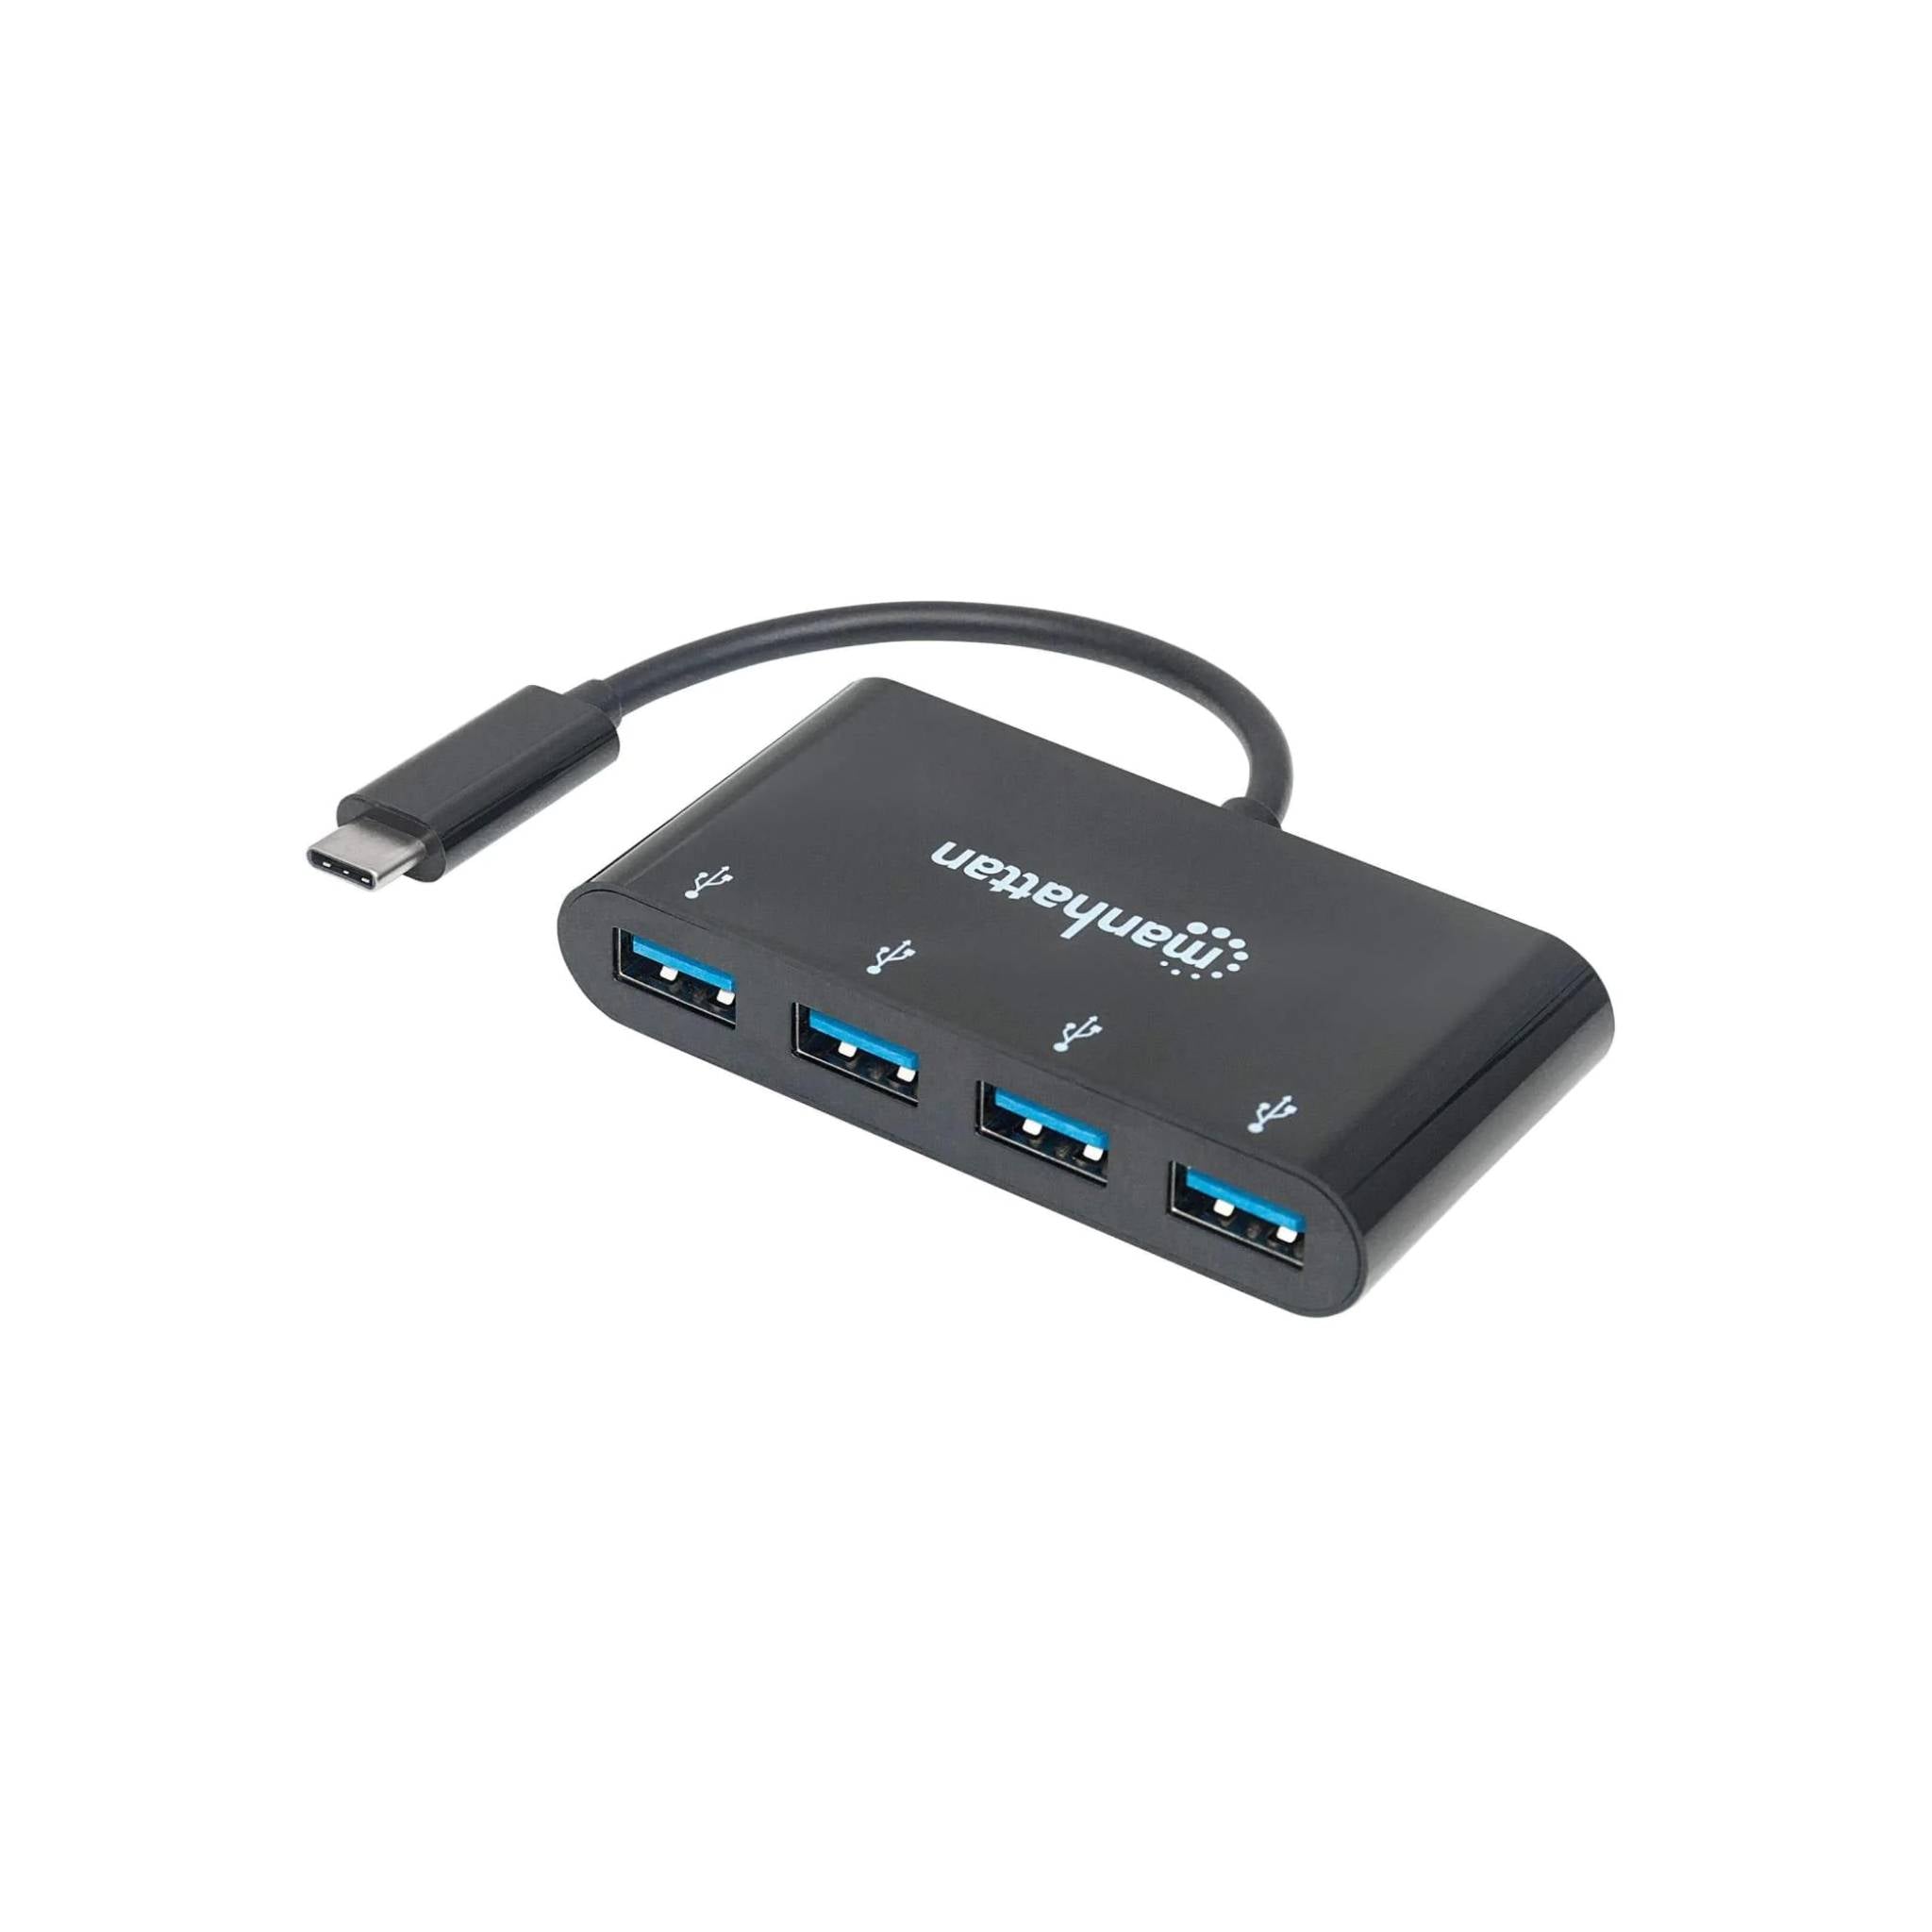 "High-Speed 4-Port USB 3.0 Type-C Hub: Add Multiple USB-A Ports for Faster Data Transfer"